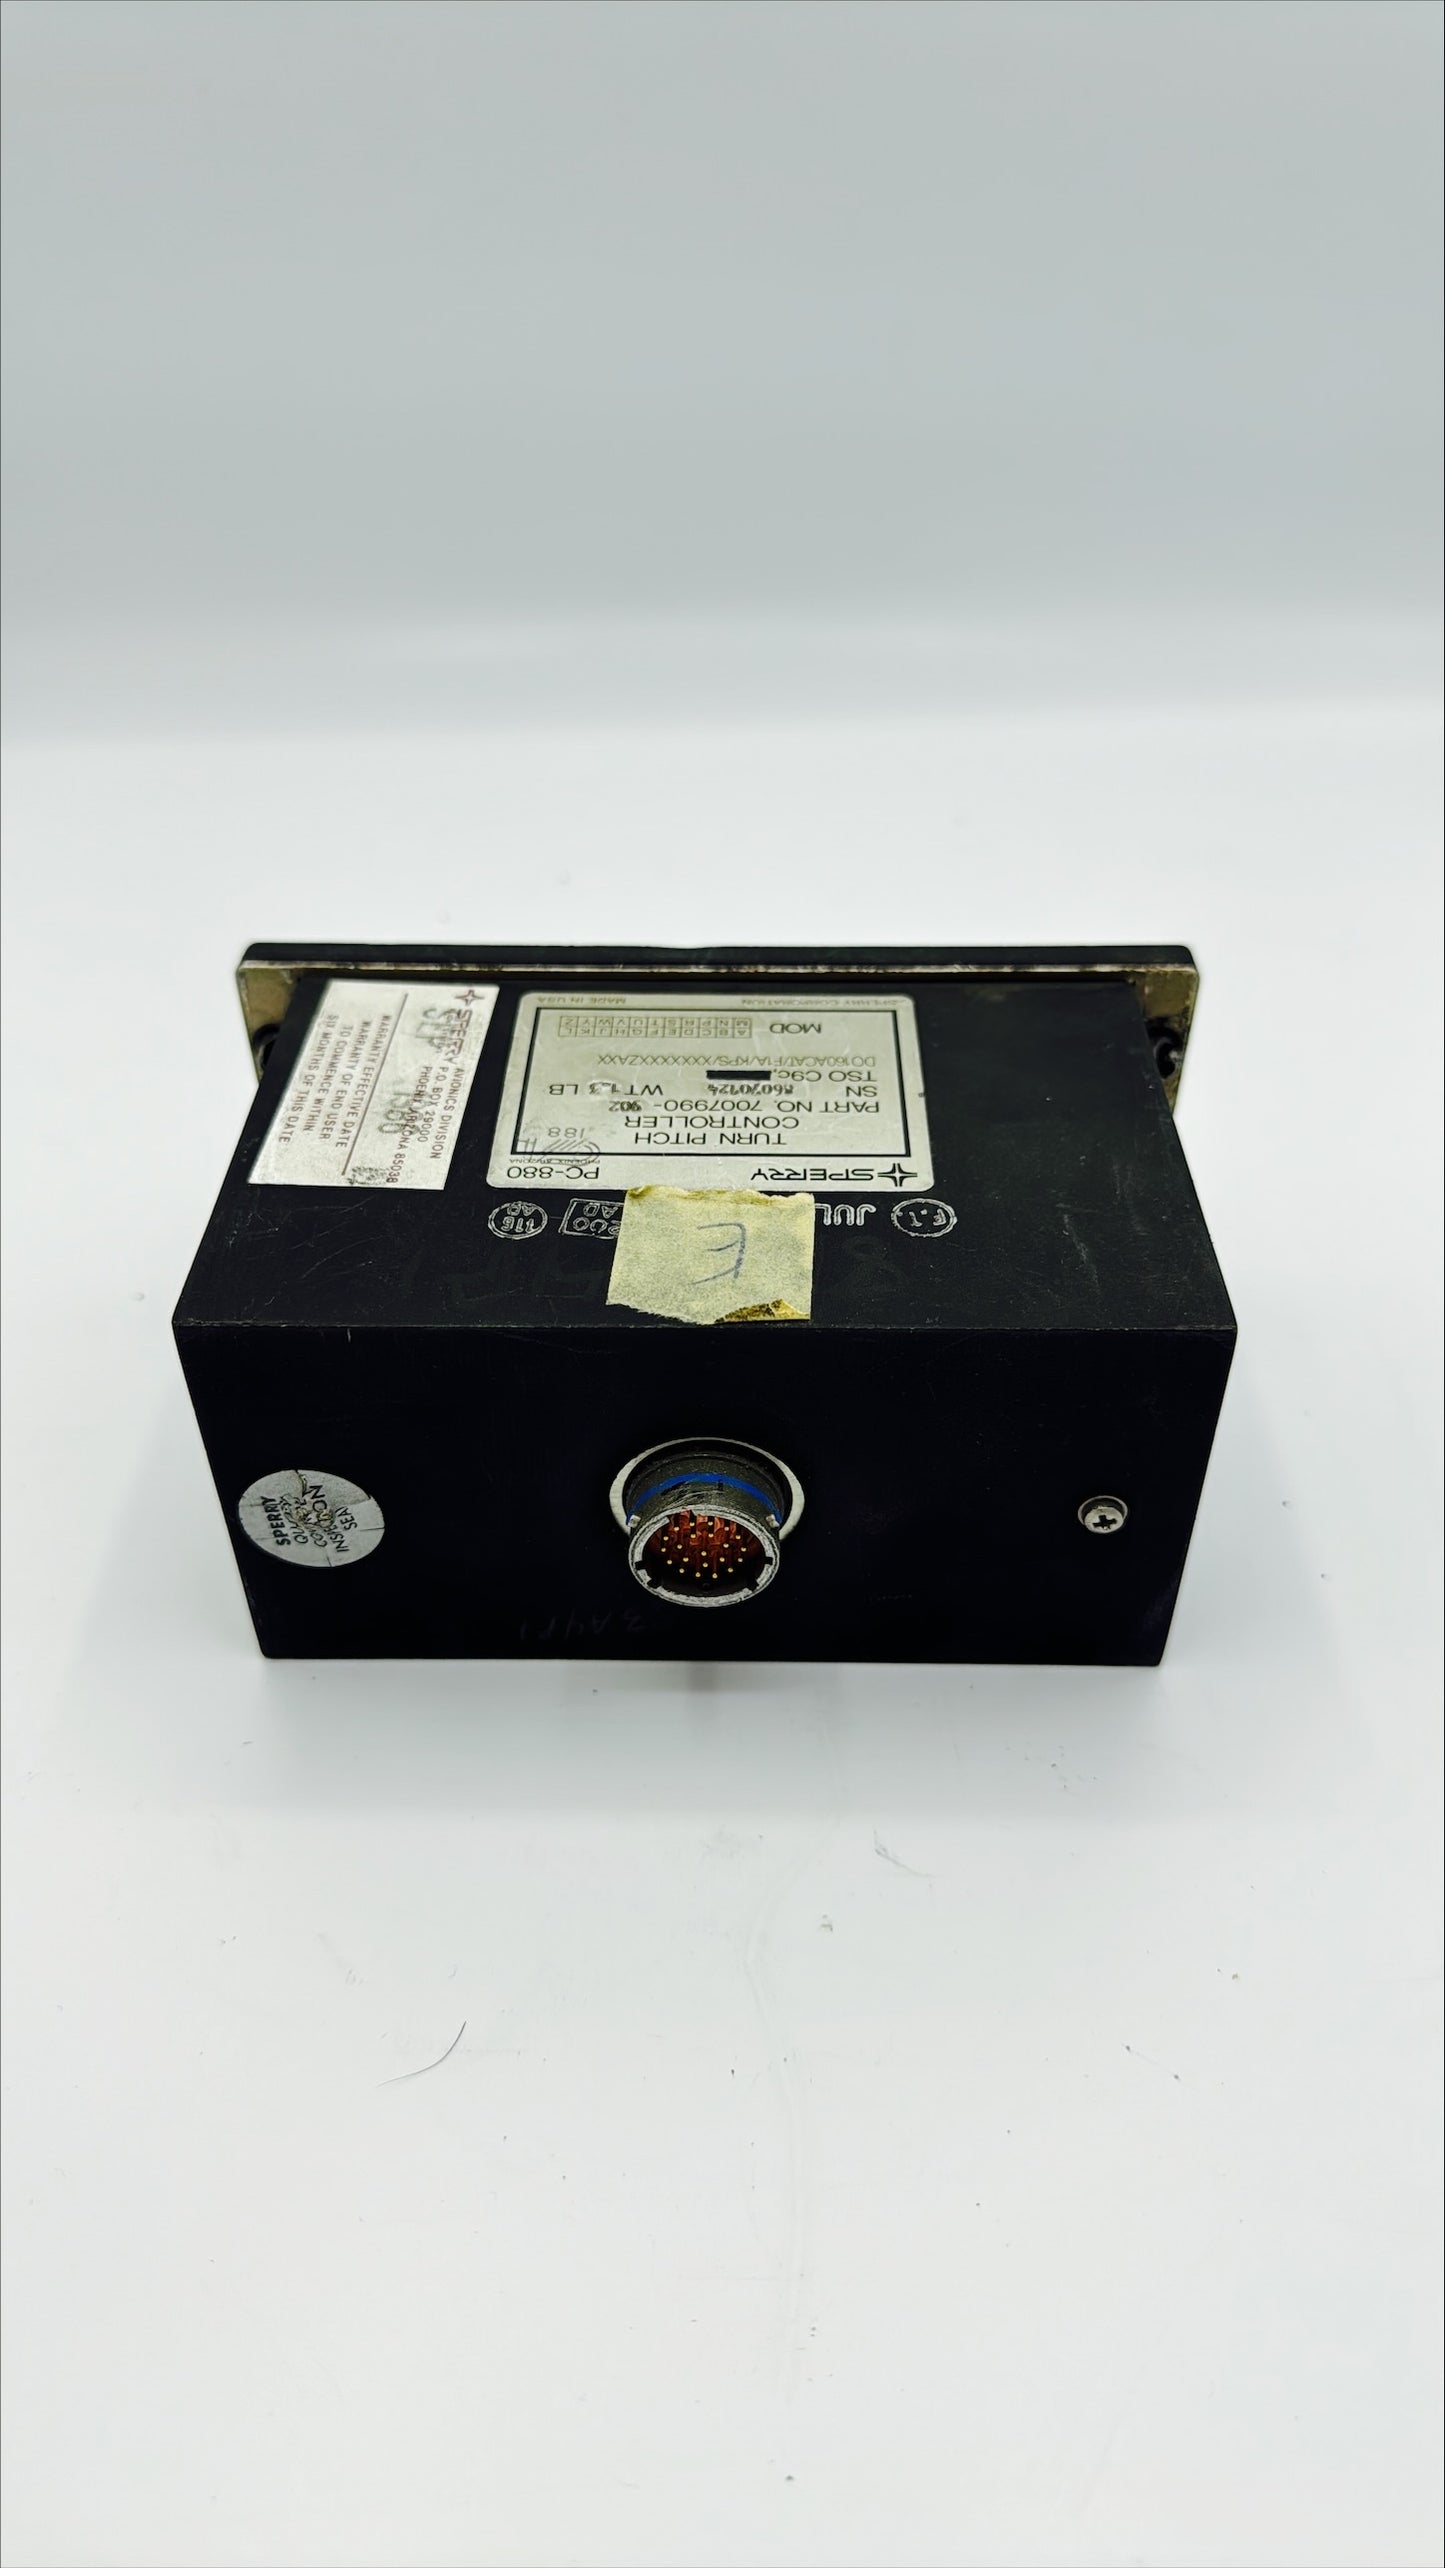 7007990-902 TURN PITCH CONTROLLER COND: SV